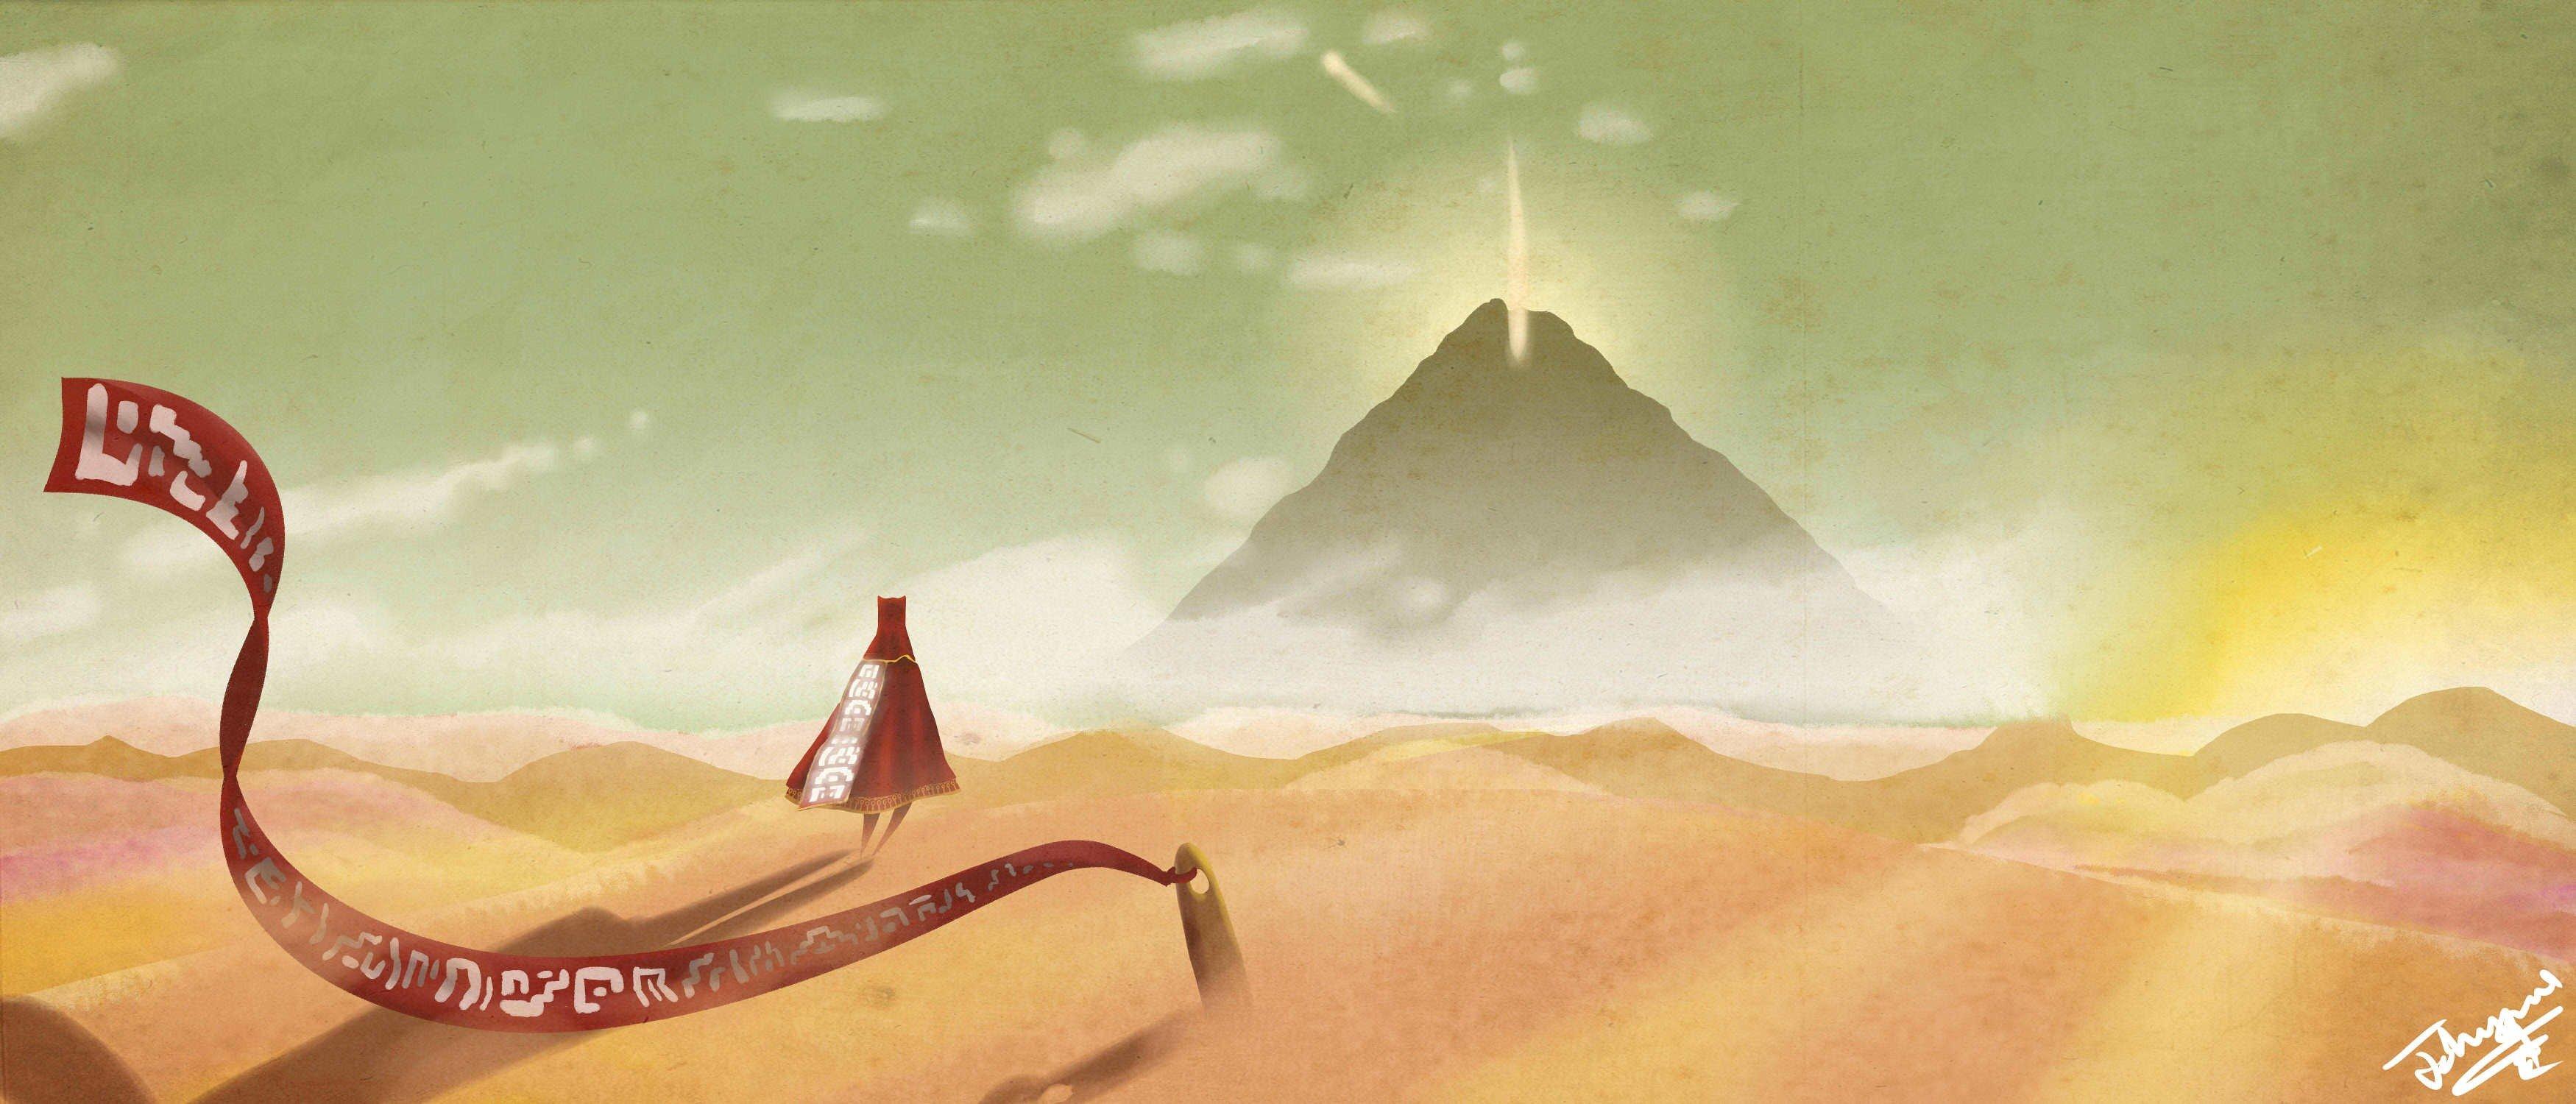 Wallpaper, 3500x1500 px, Journey game, video games 3500x1500